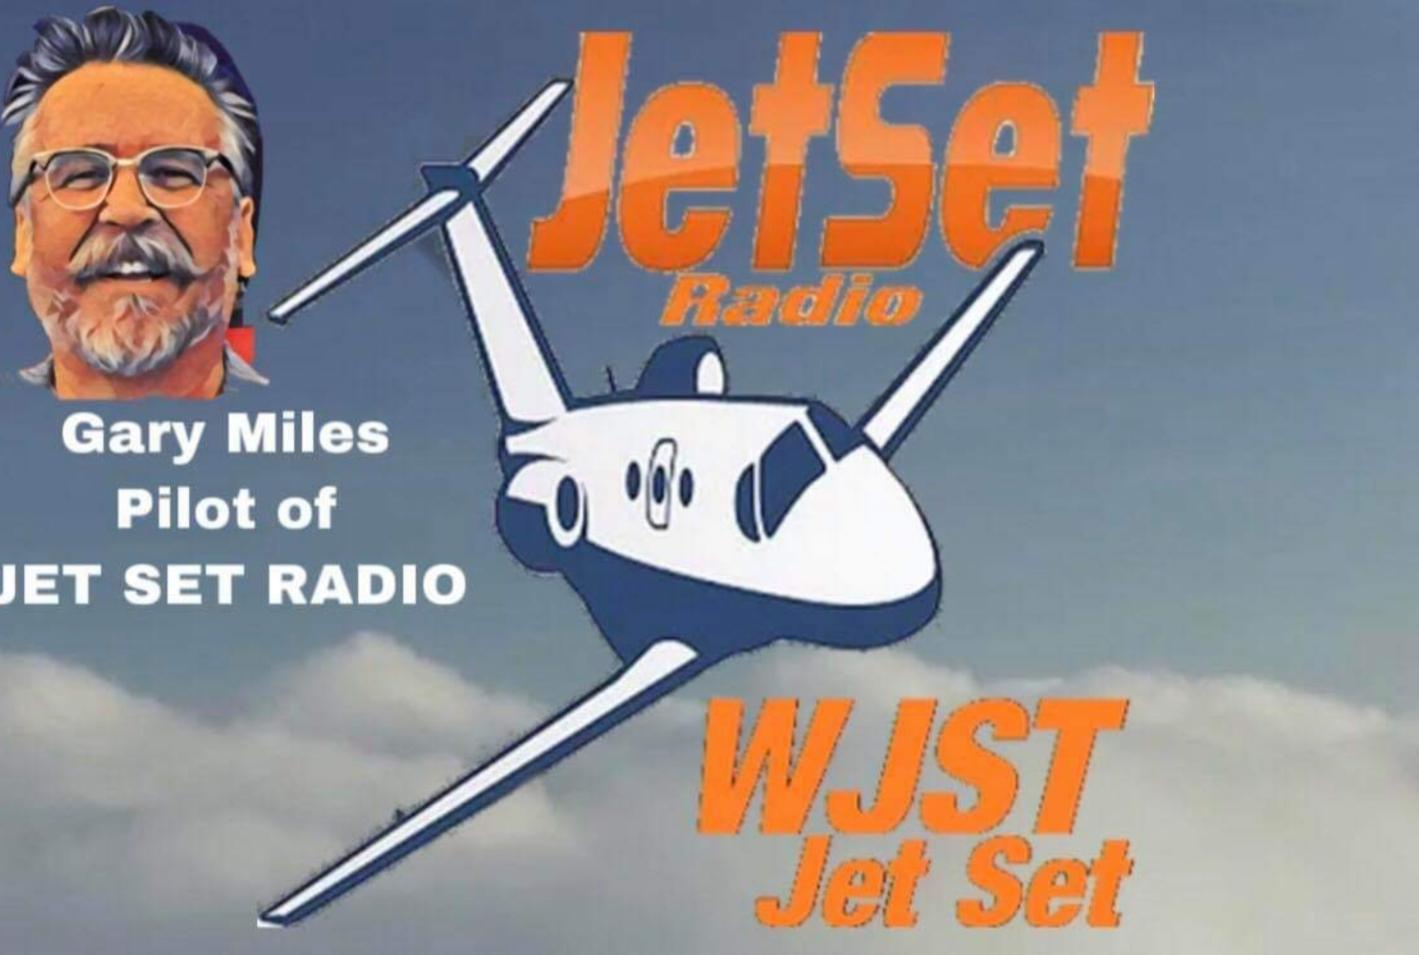 Art for Welcome To The New Jet Age! WJST Jet Set by Captain Gary Miles